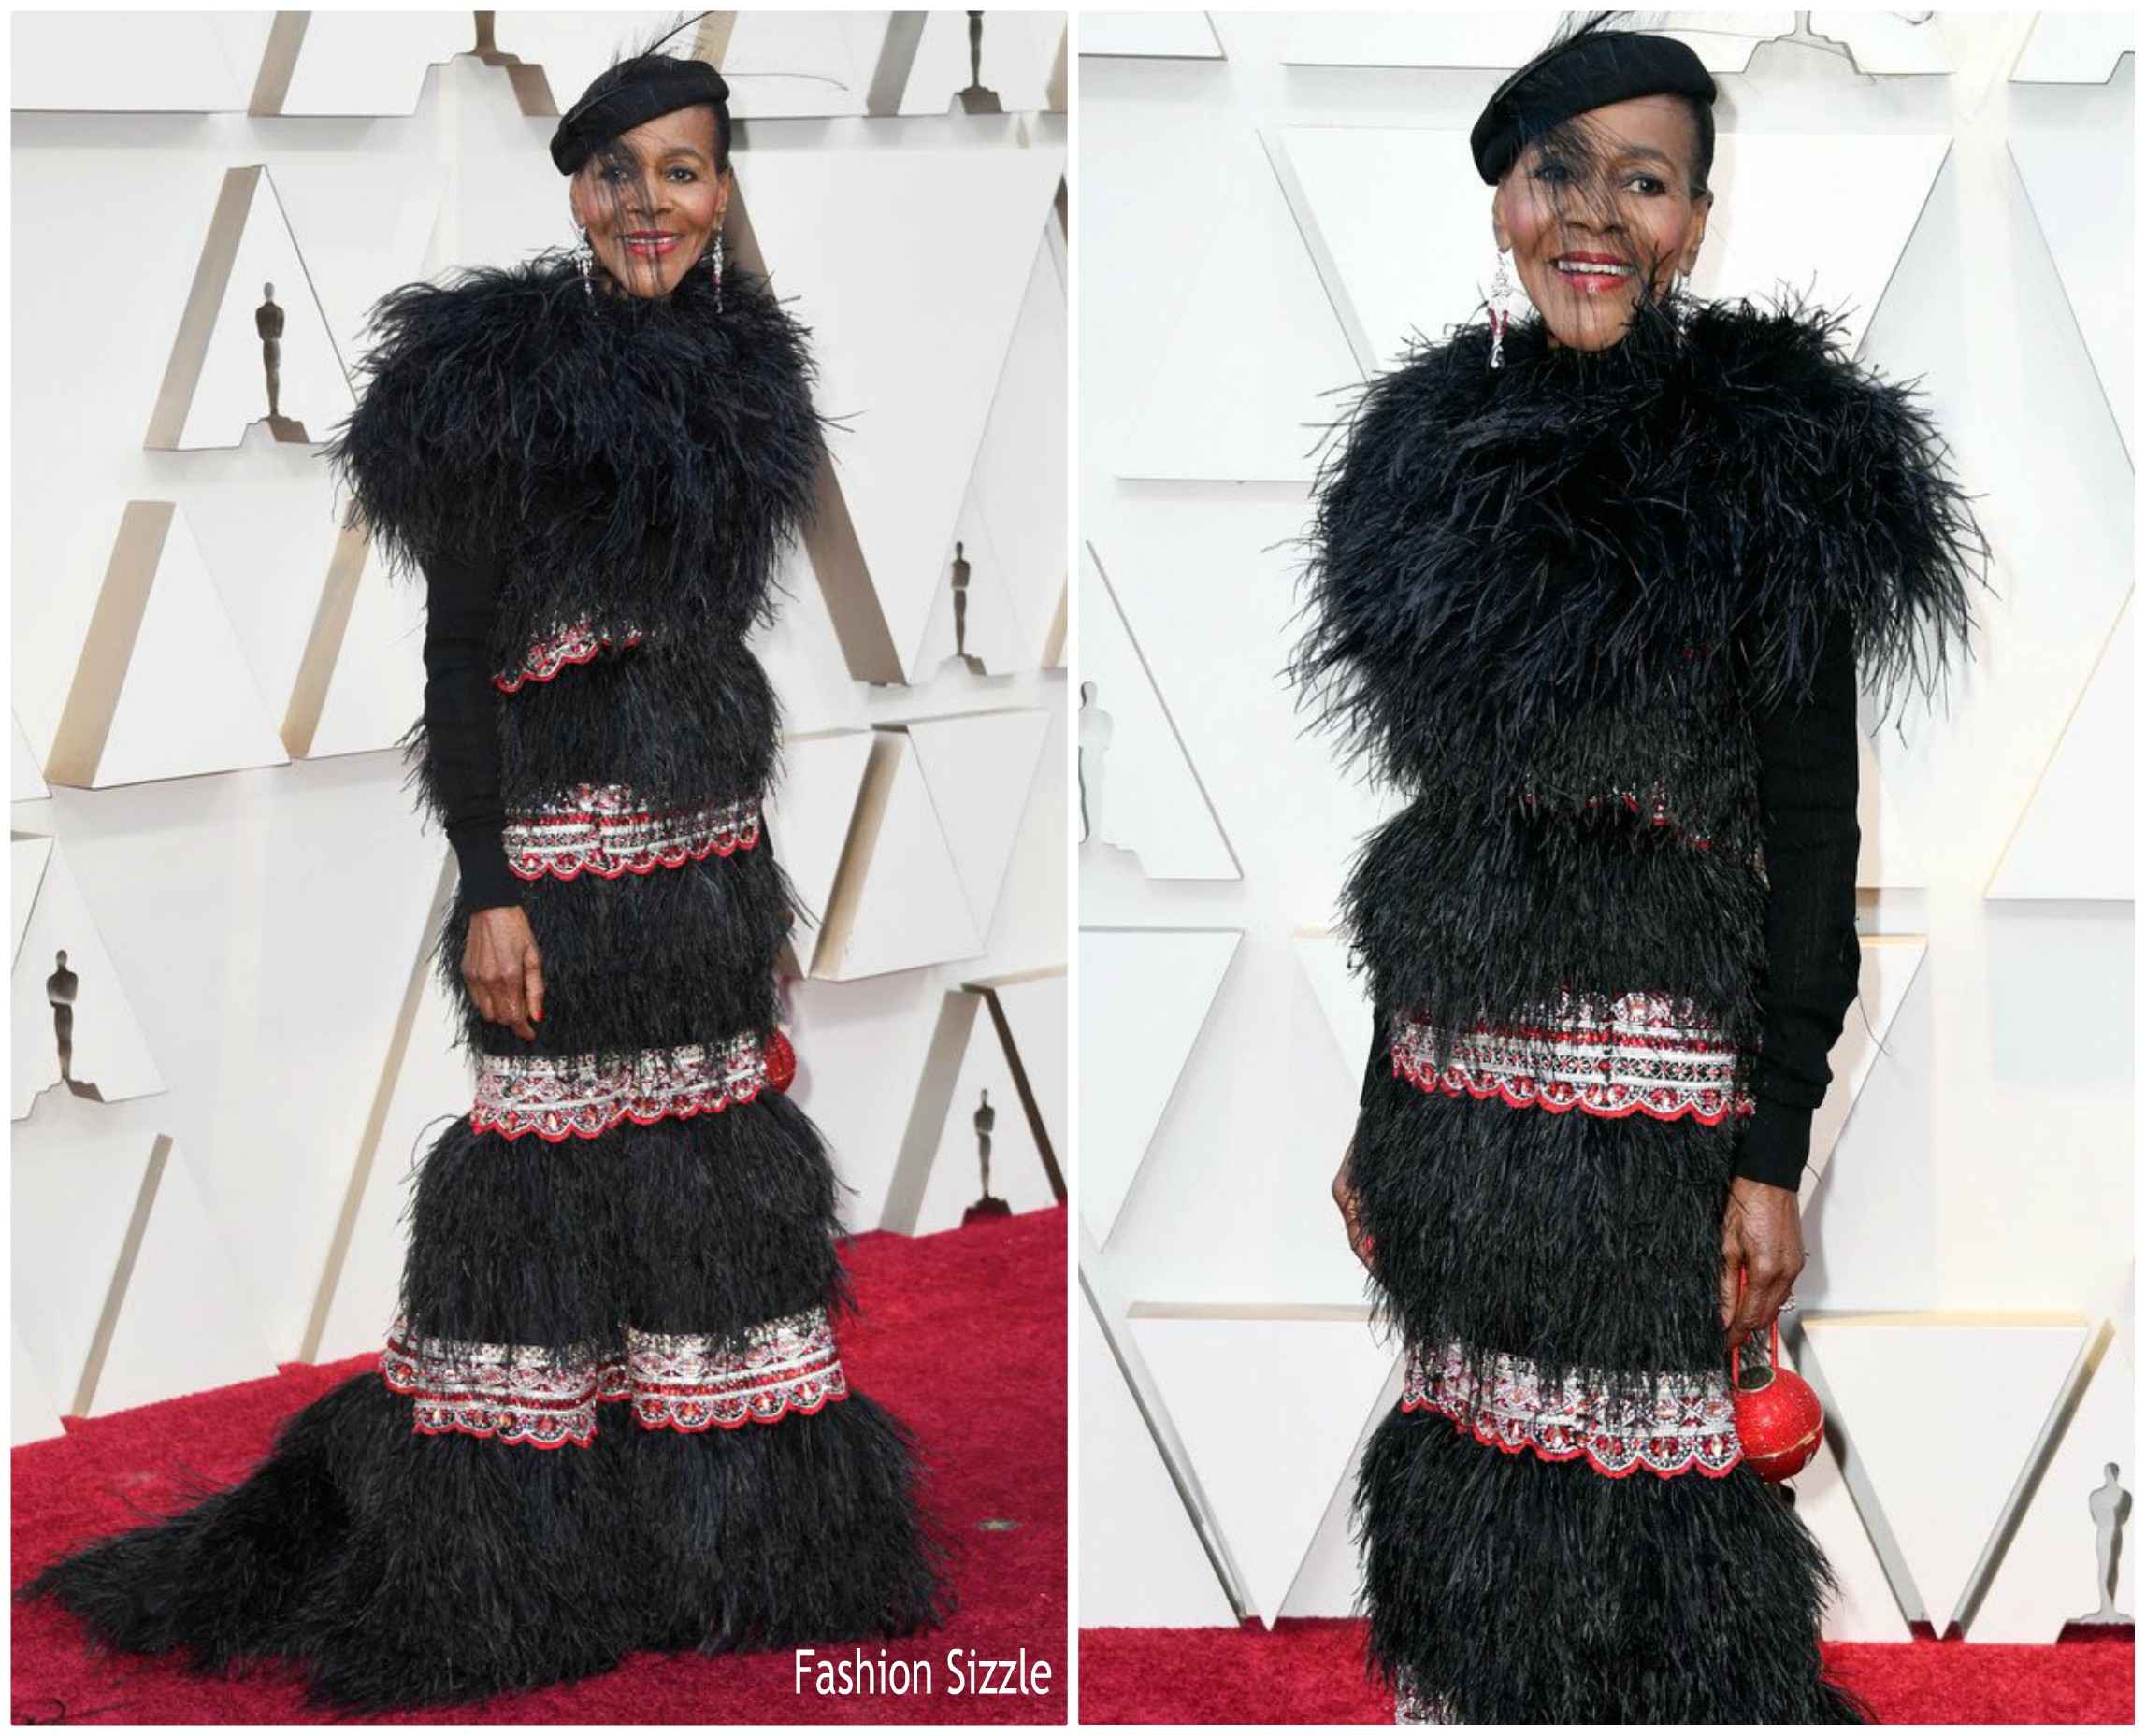 cicely-tyson-in-b-michael-couture-2019-oscars